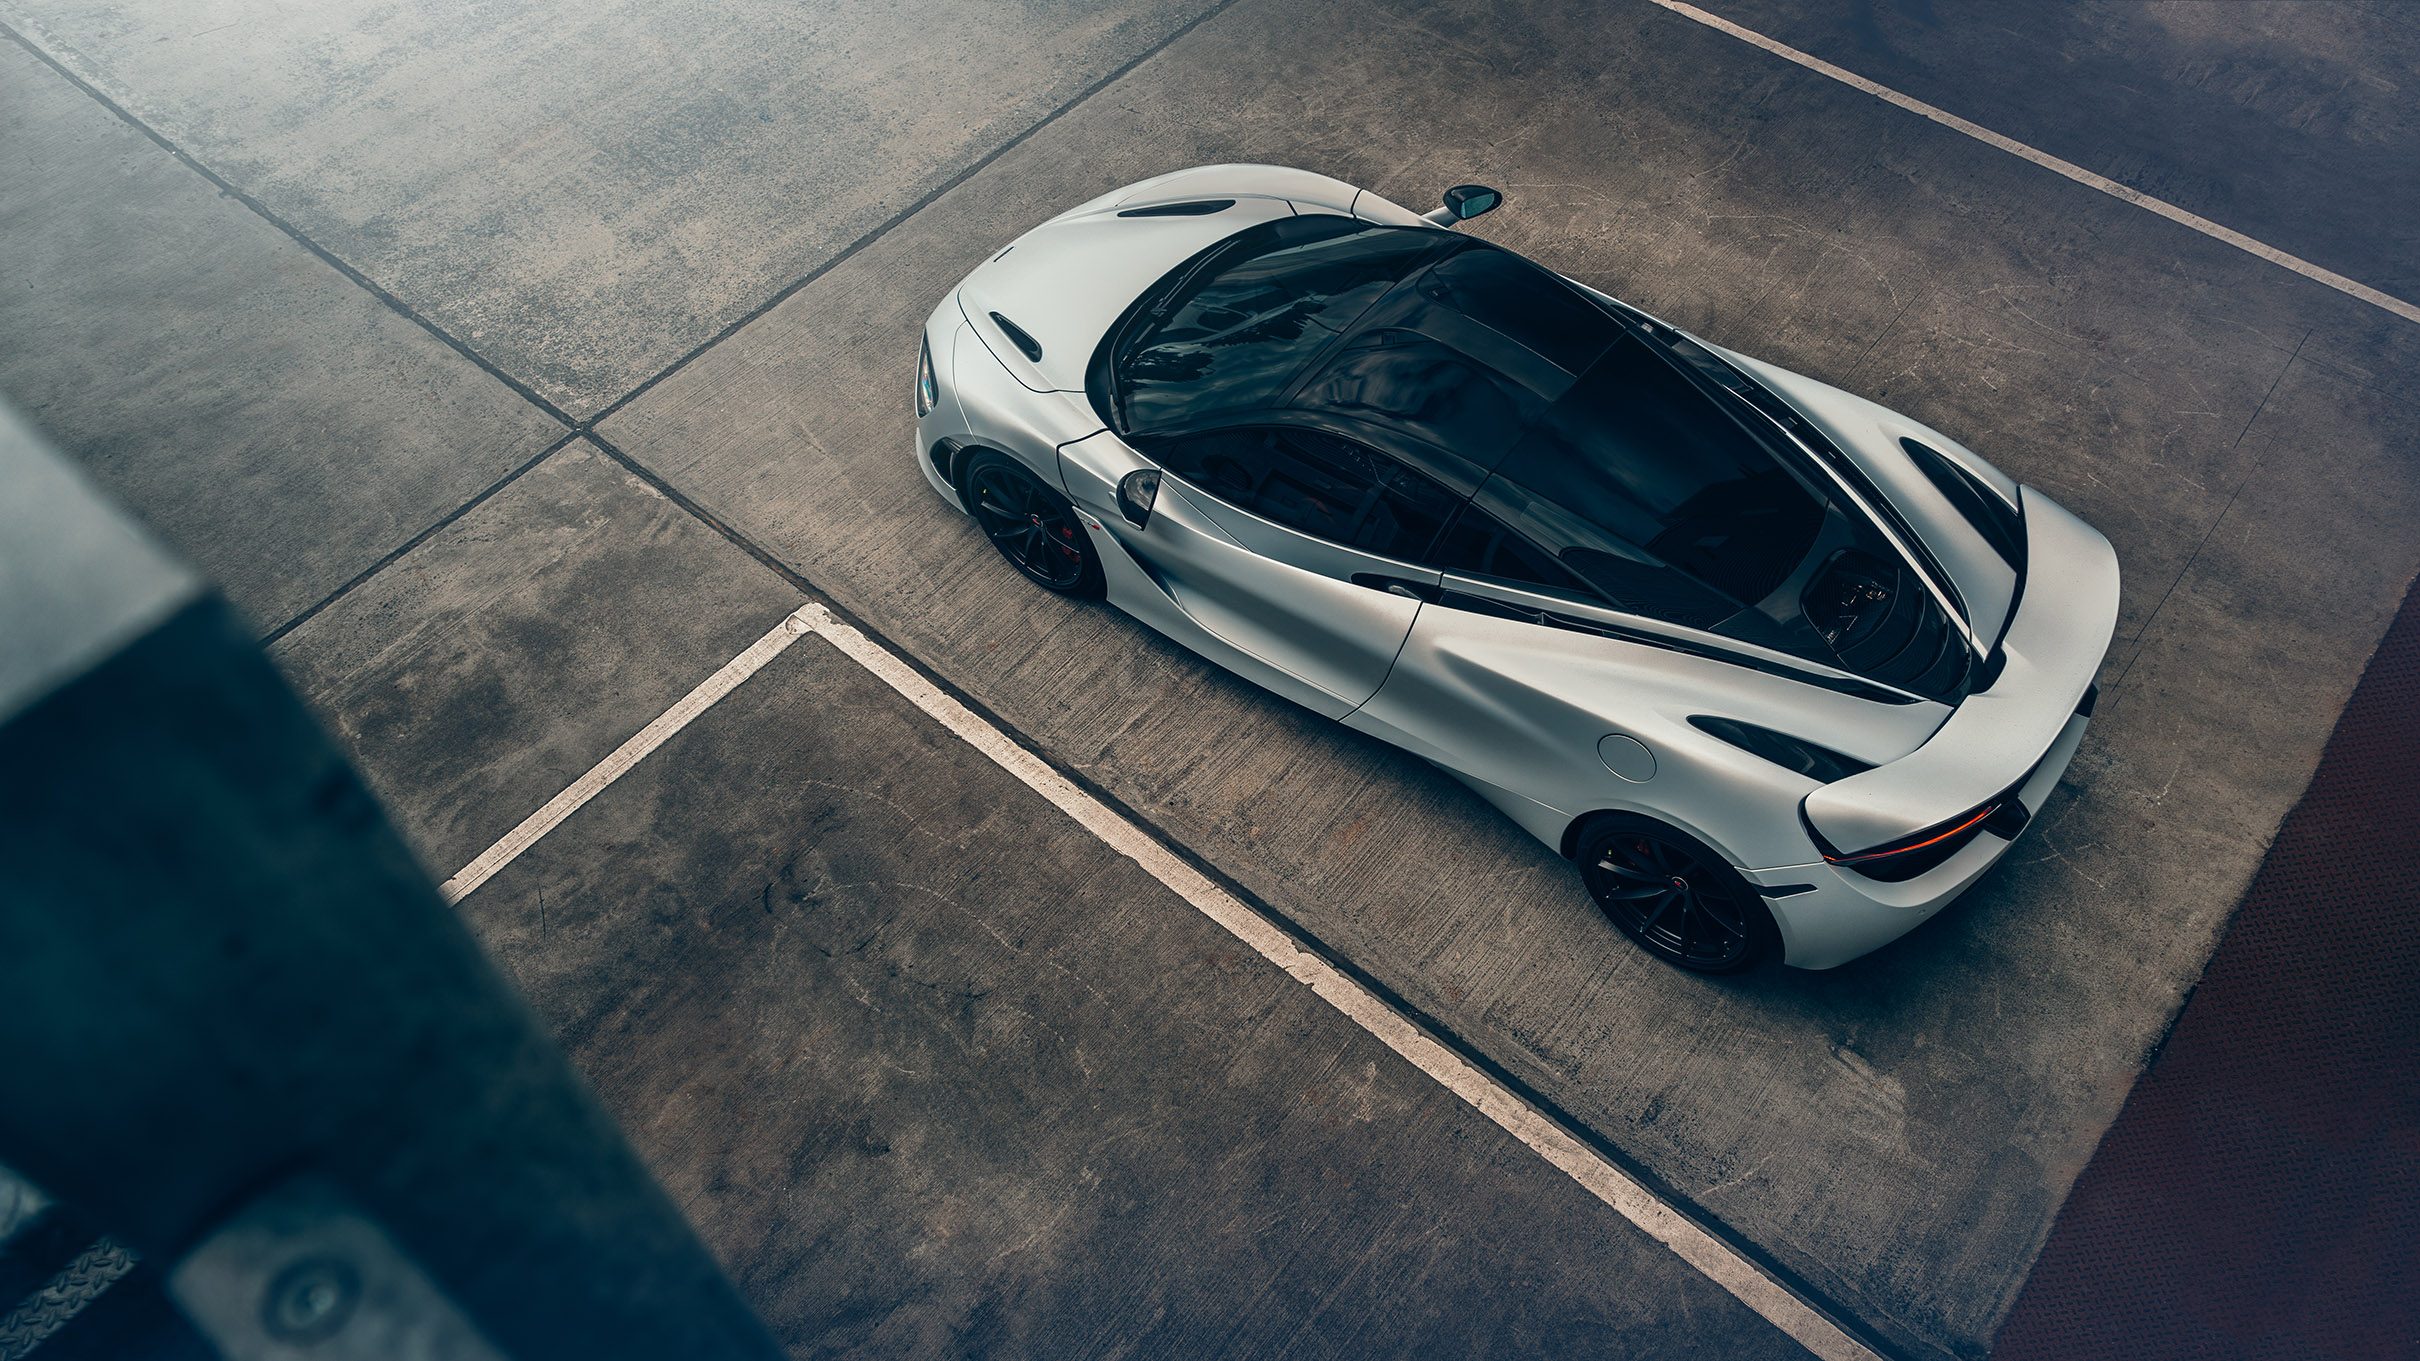 McLaren 720s before the dome